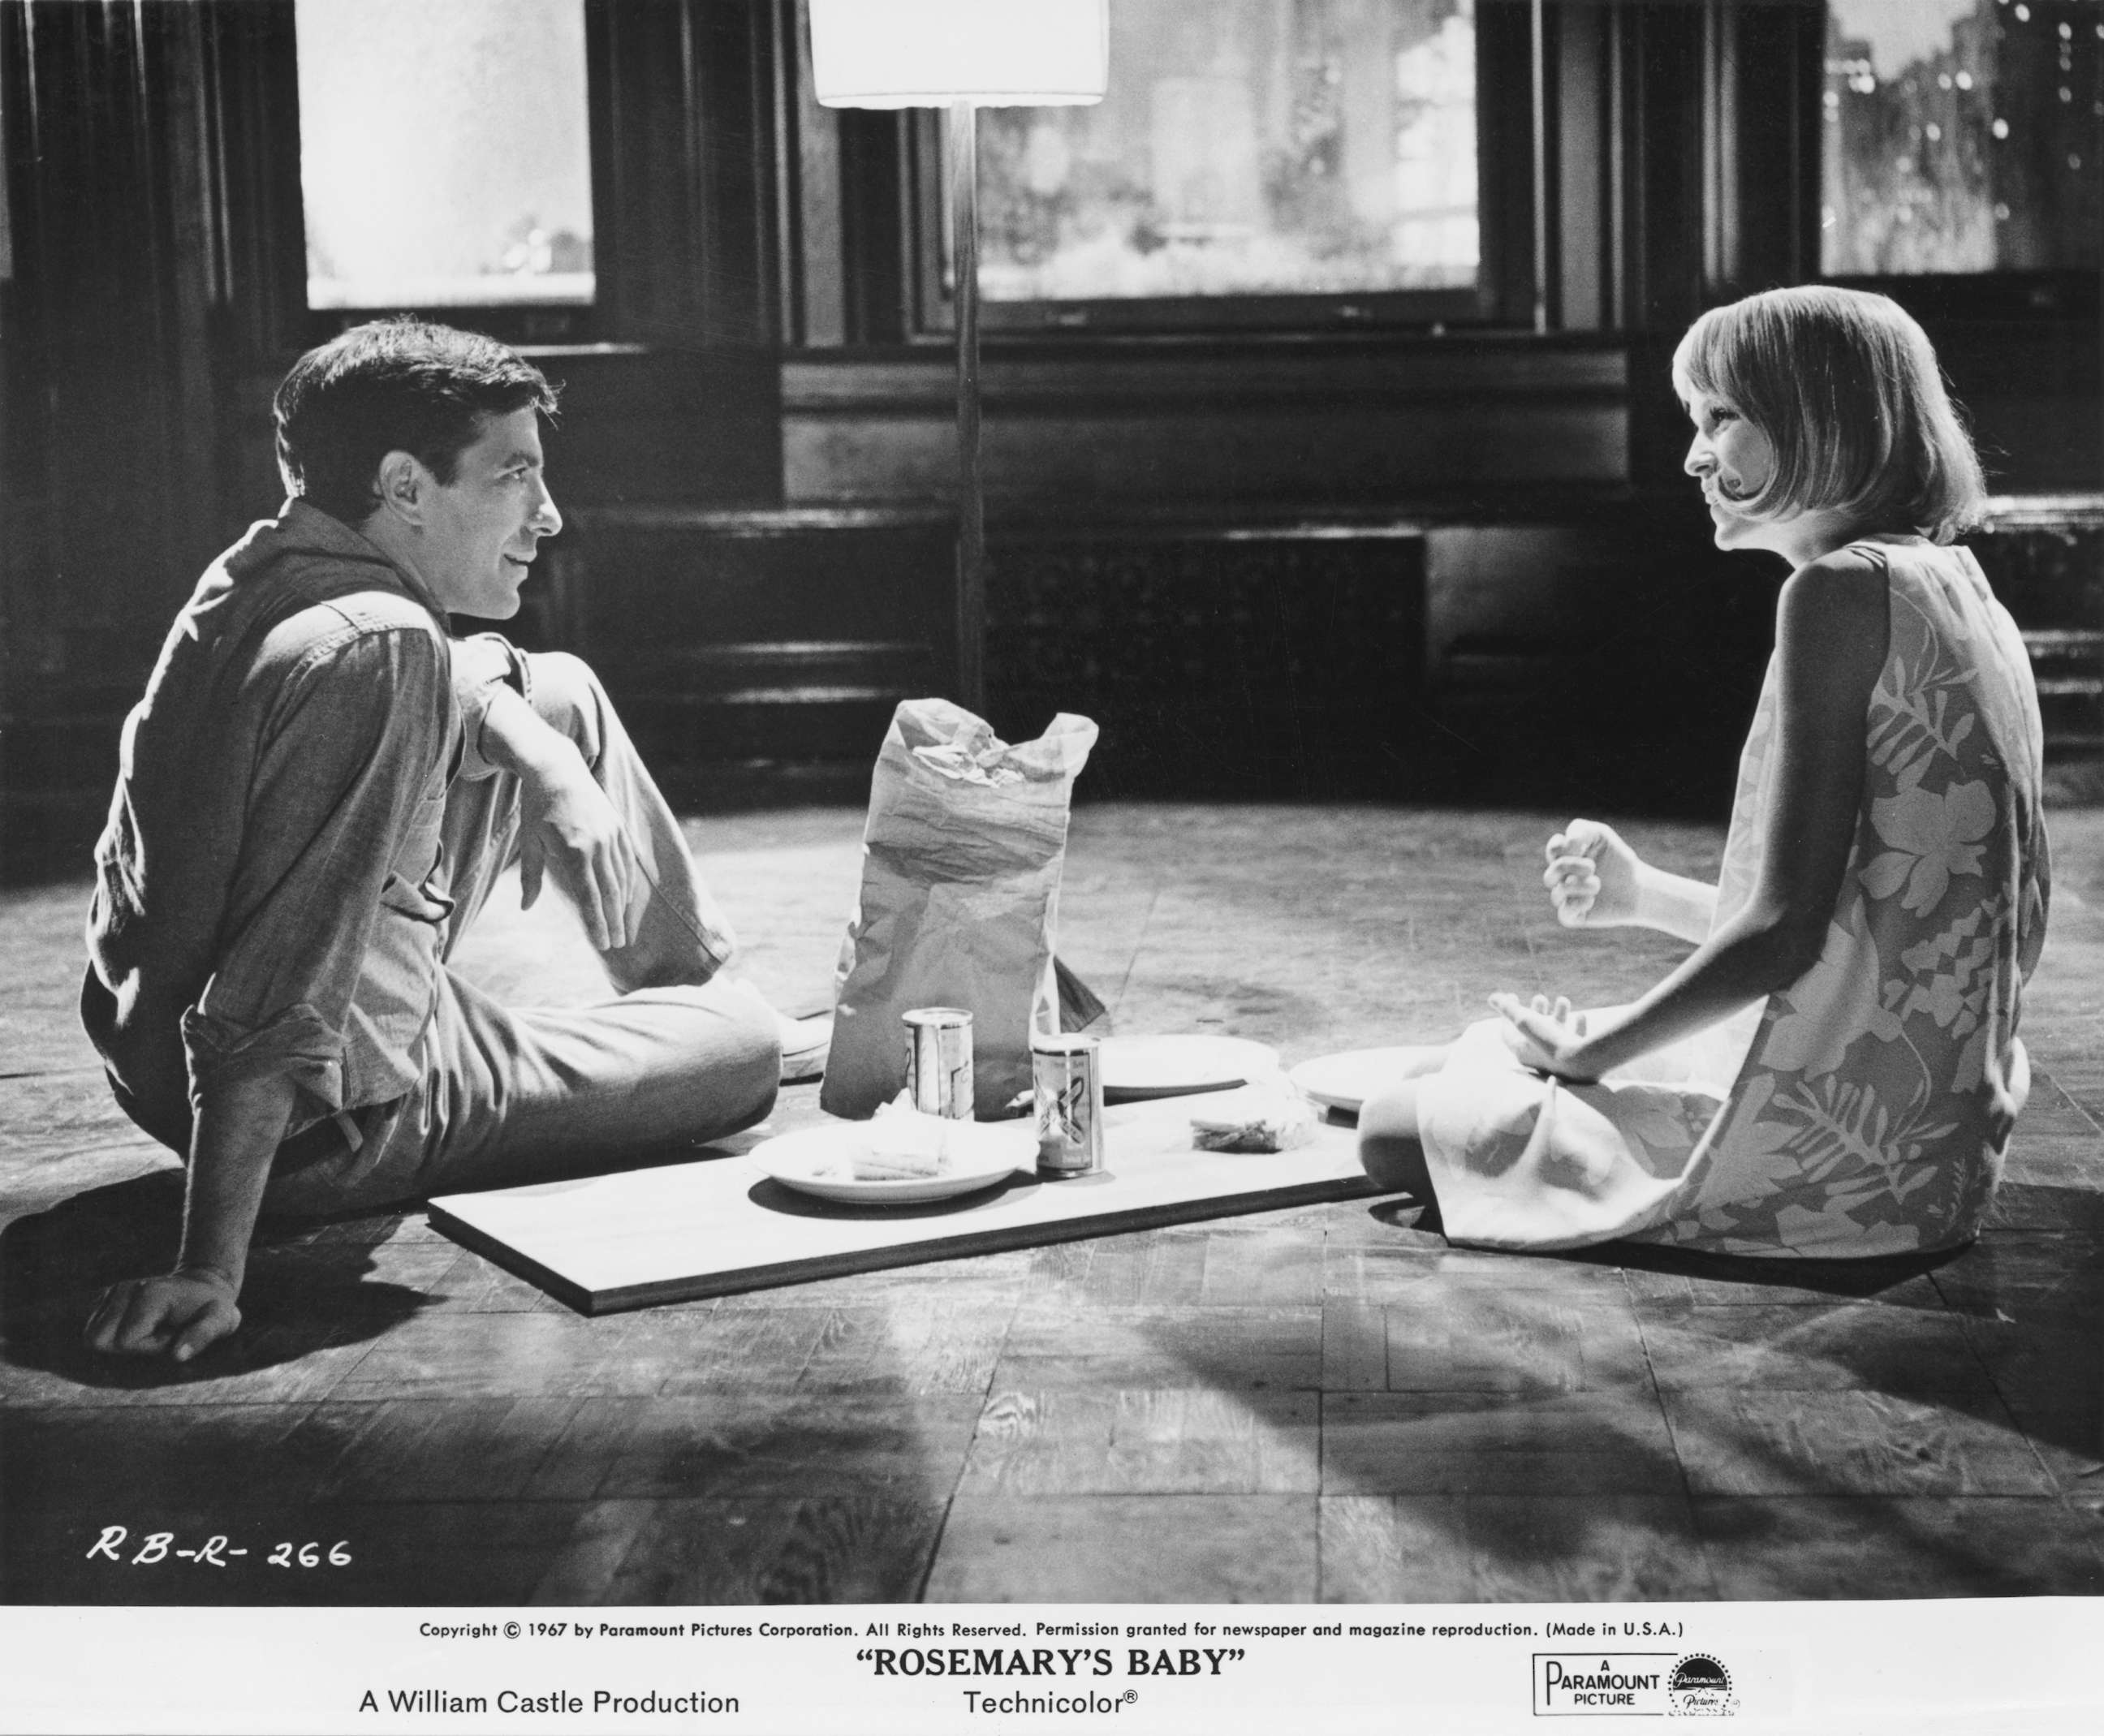 PHOTO: American actor, director and screenwriter John Cassavetes (1929 - 1989) stars with Mia Farrow in the film 'Rosemary's Baby,' 1967.